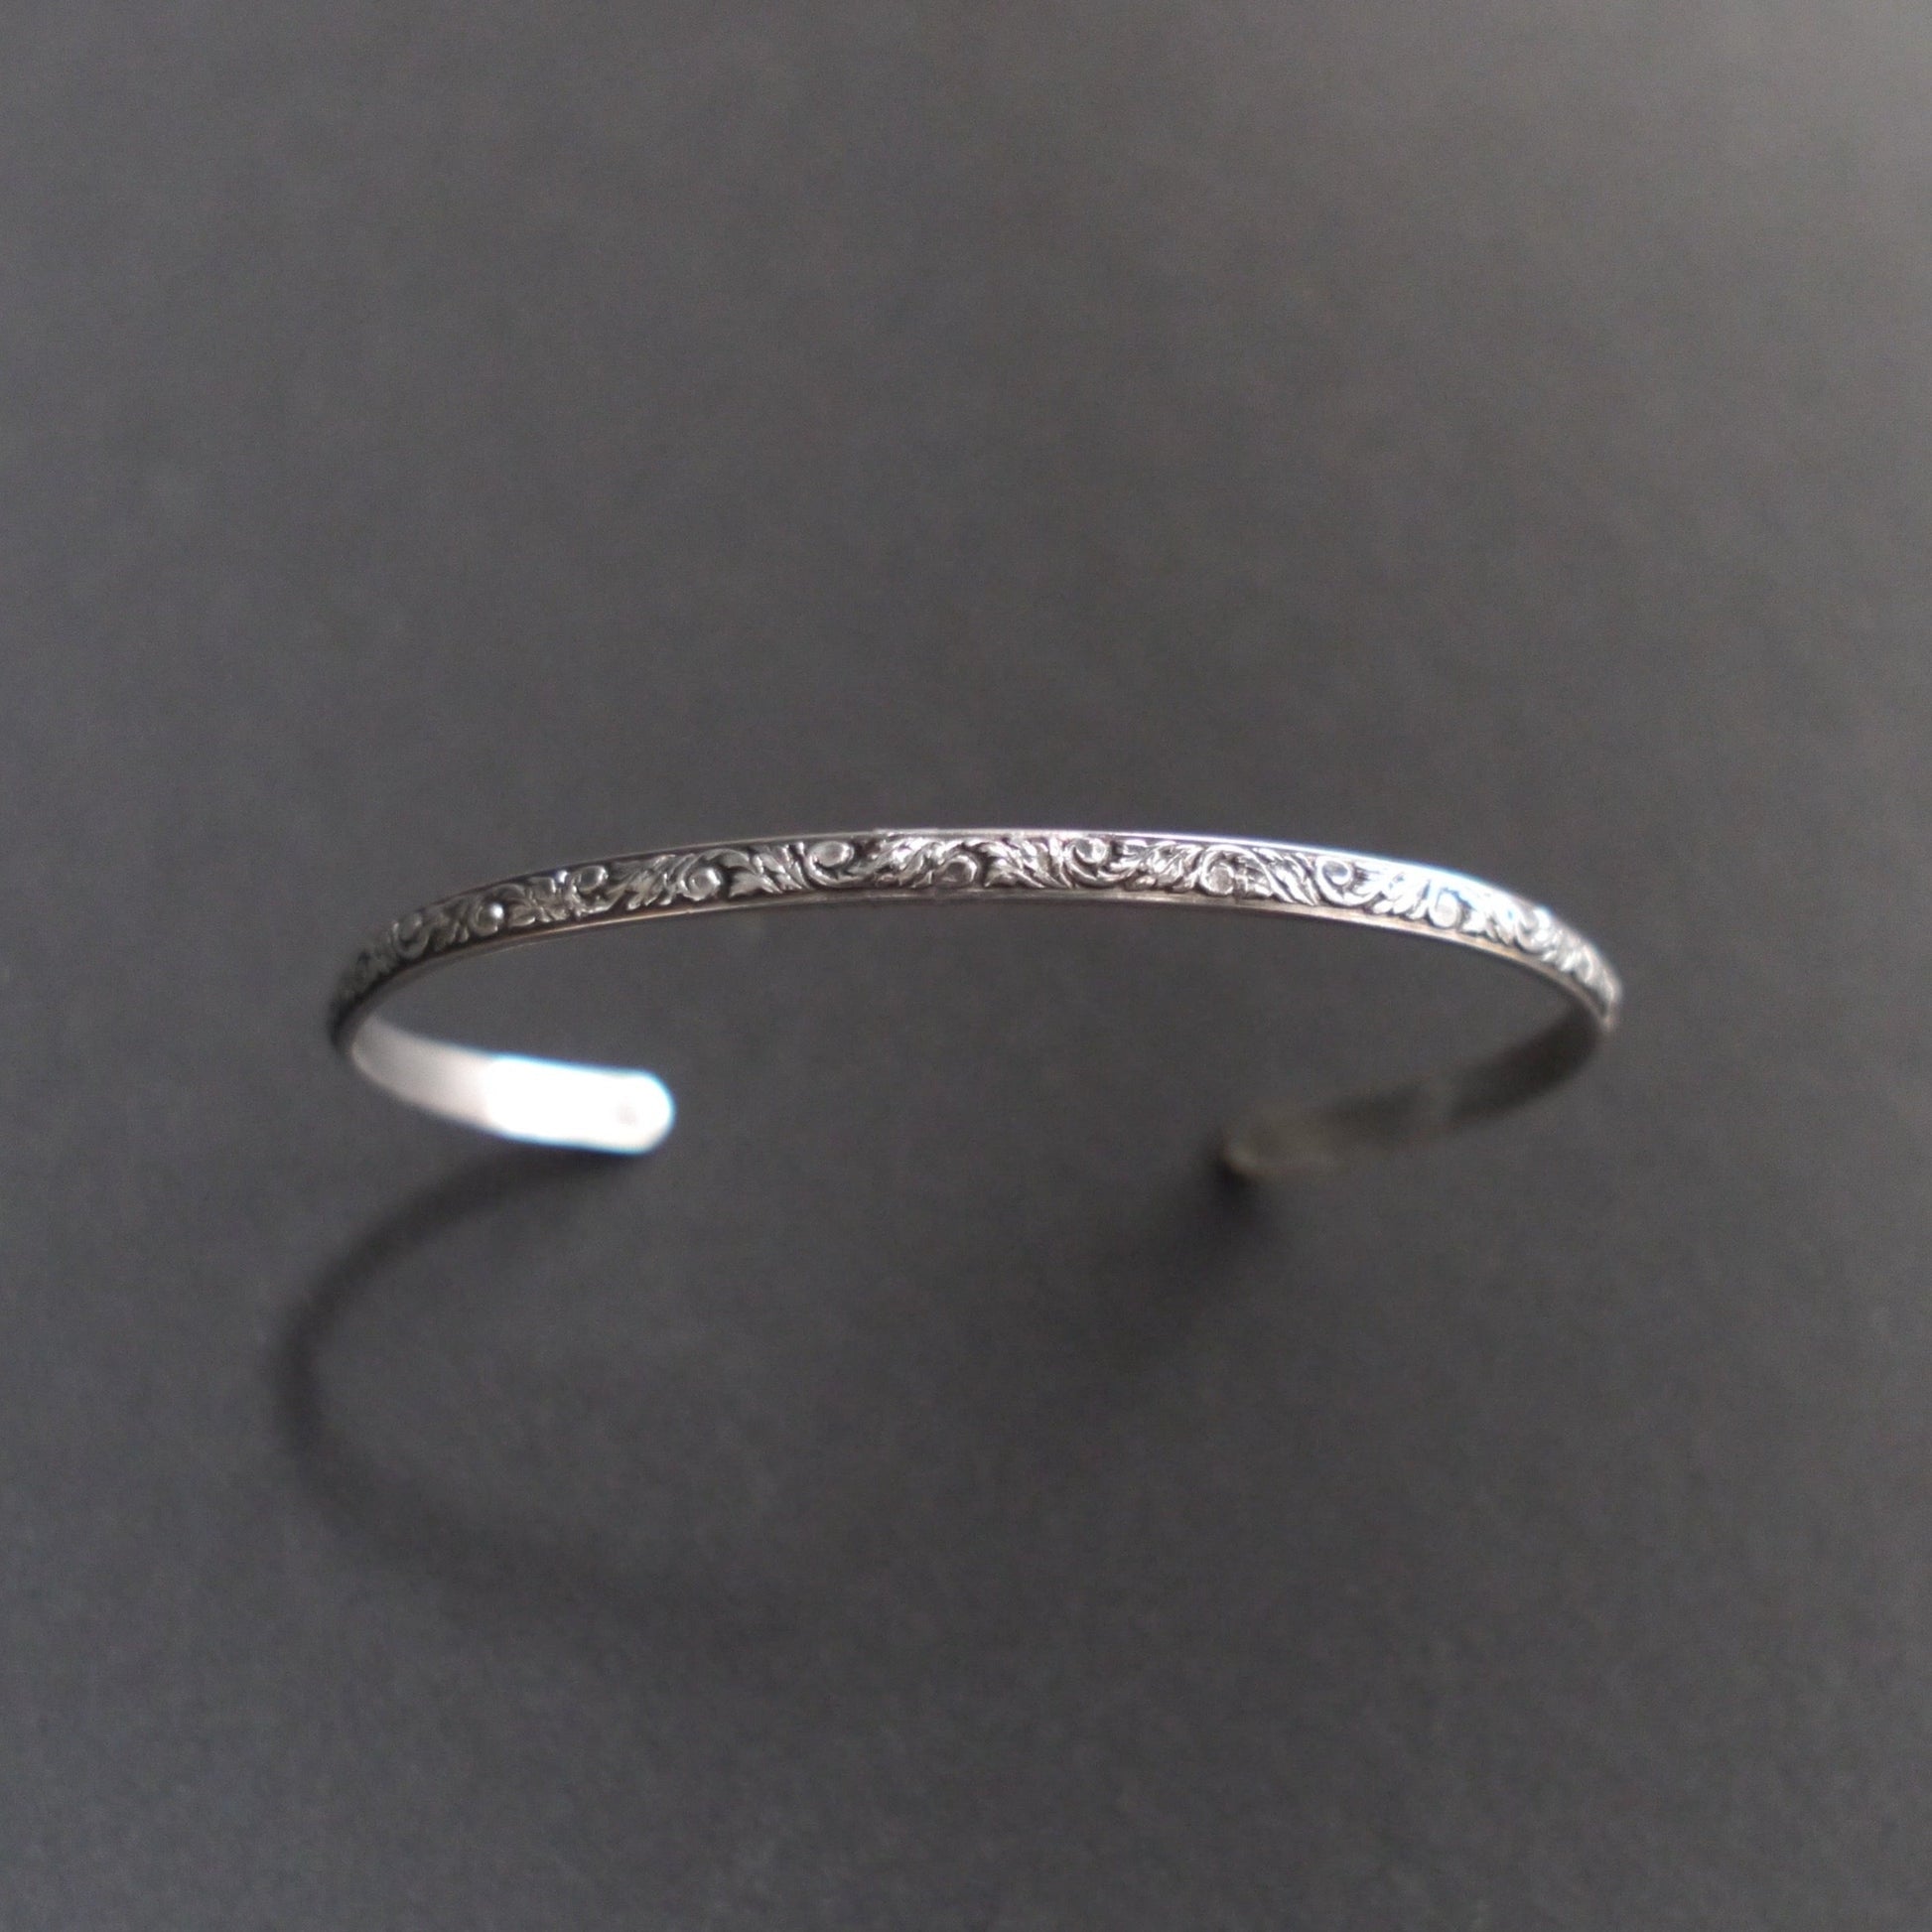 Floral Vine Cuff in 3mm Sterling Silver